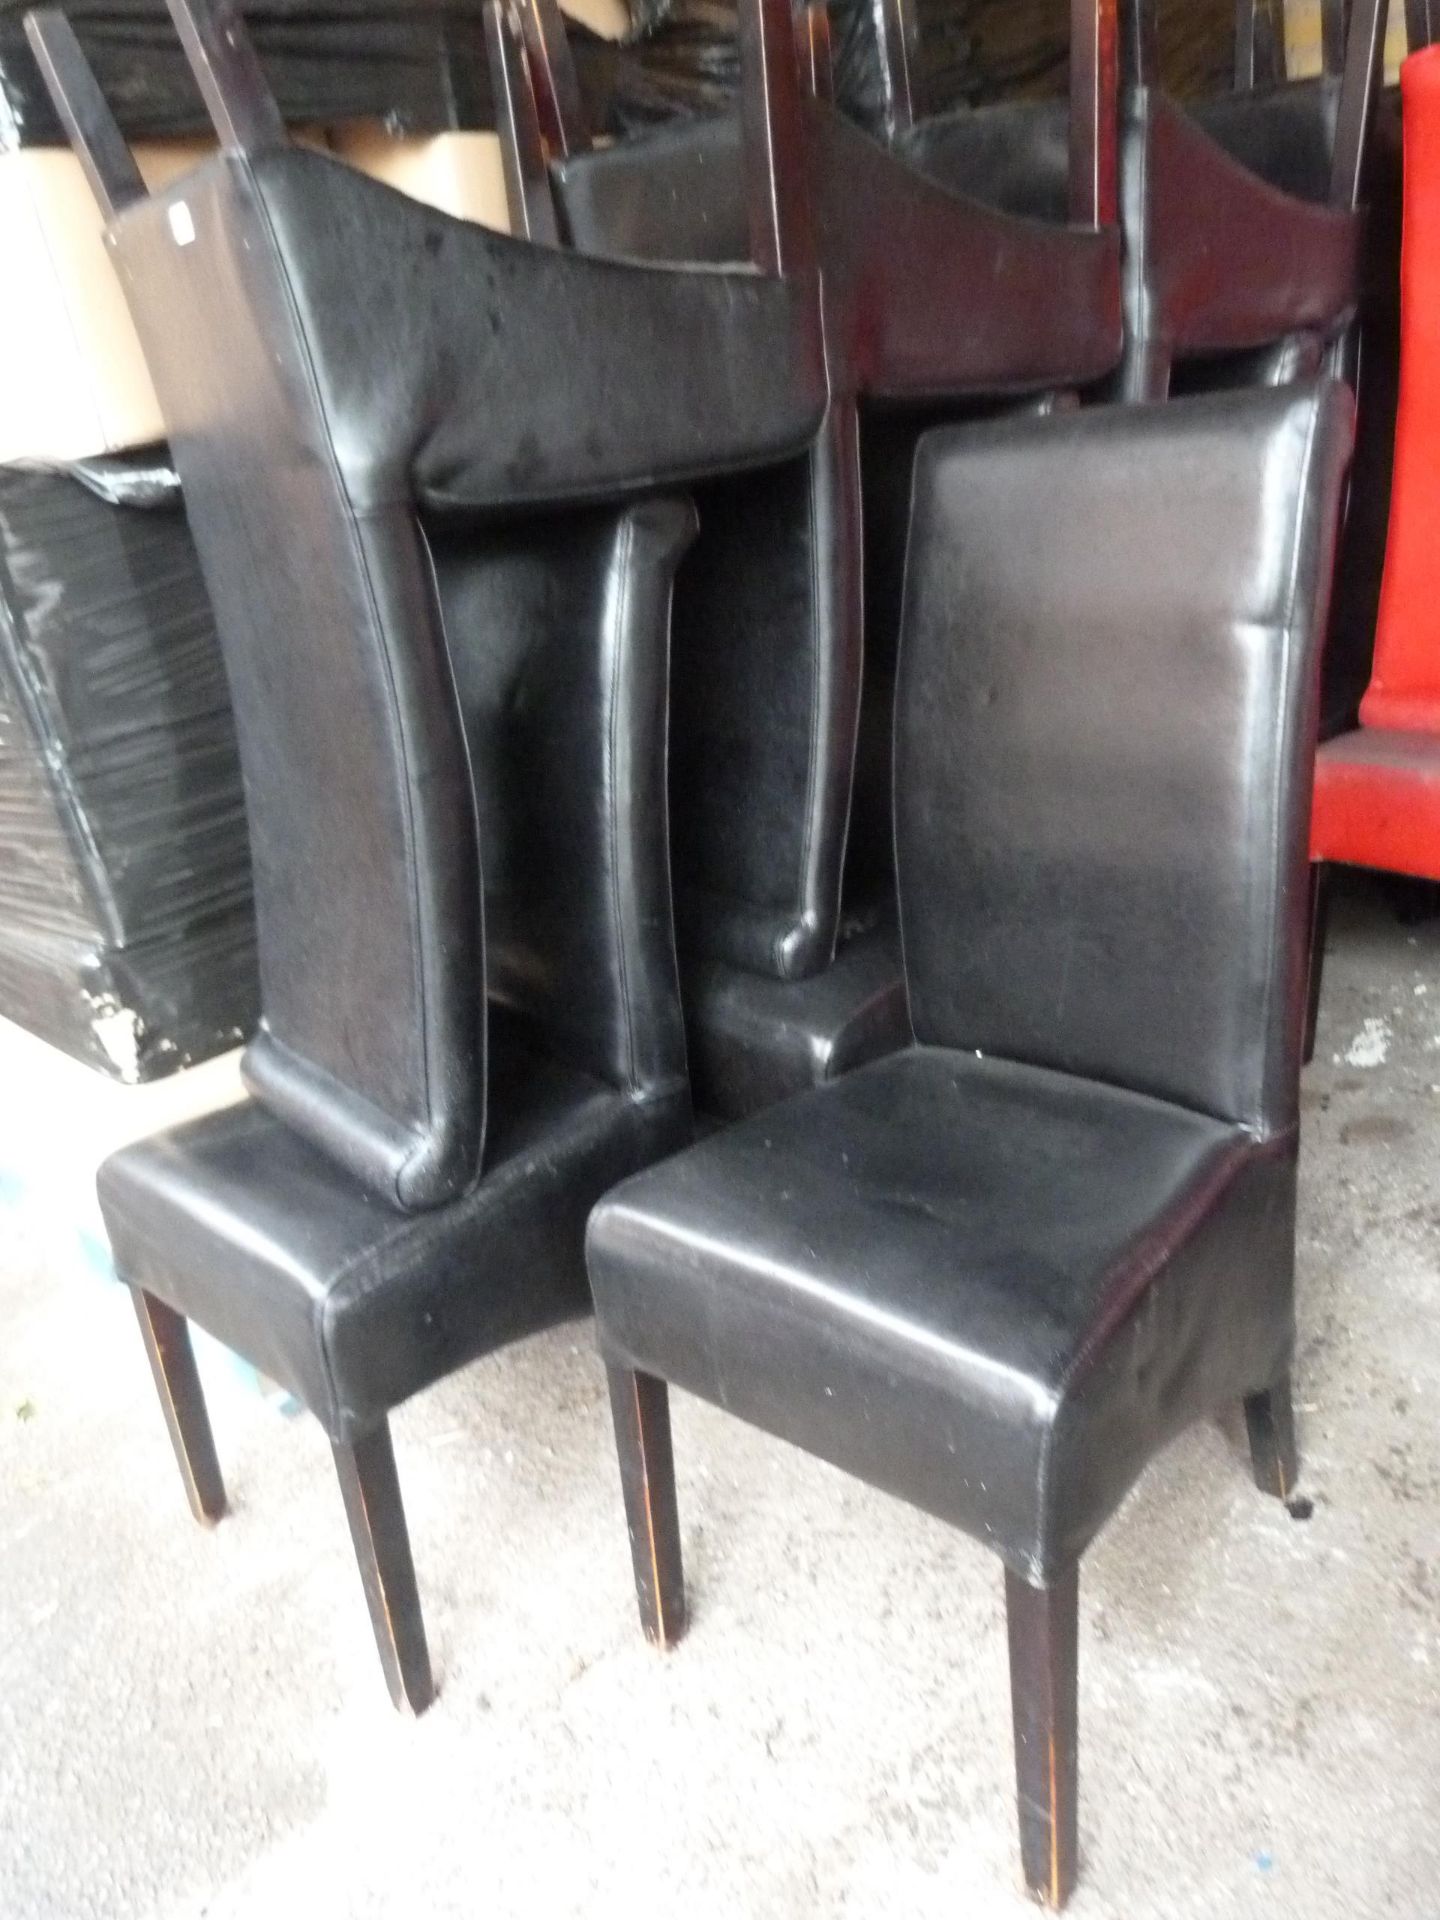 11 Black Upholstered Chairs (worn condition)